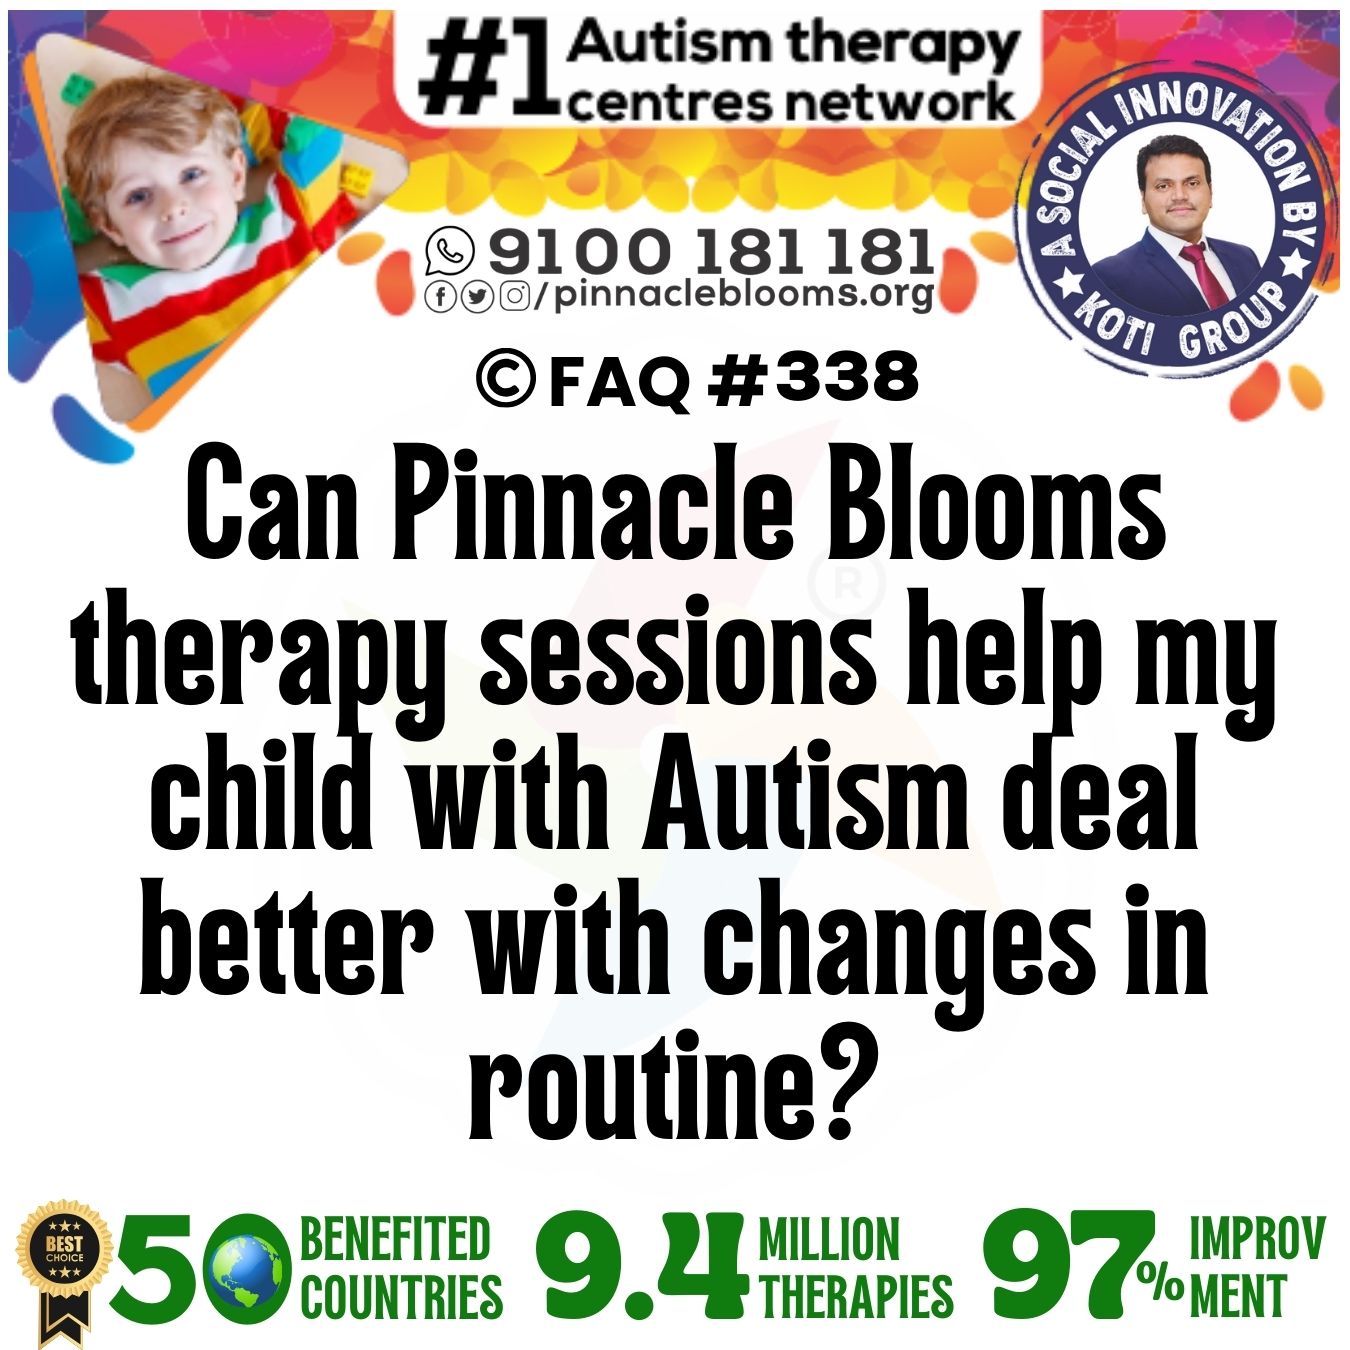 Can Pinnacle Blooms therapy sessions help my child with Autism deal better with changes in routine?